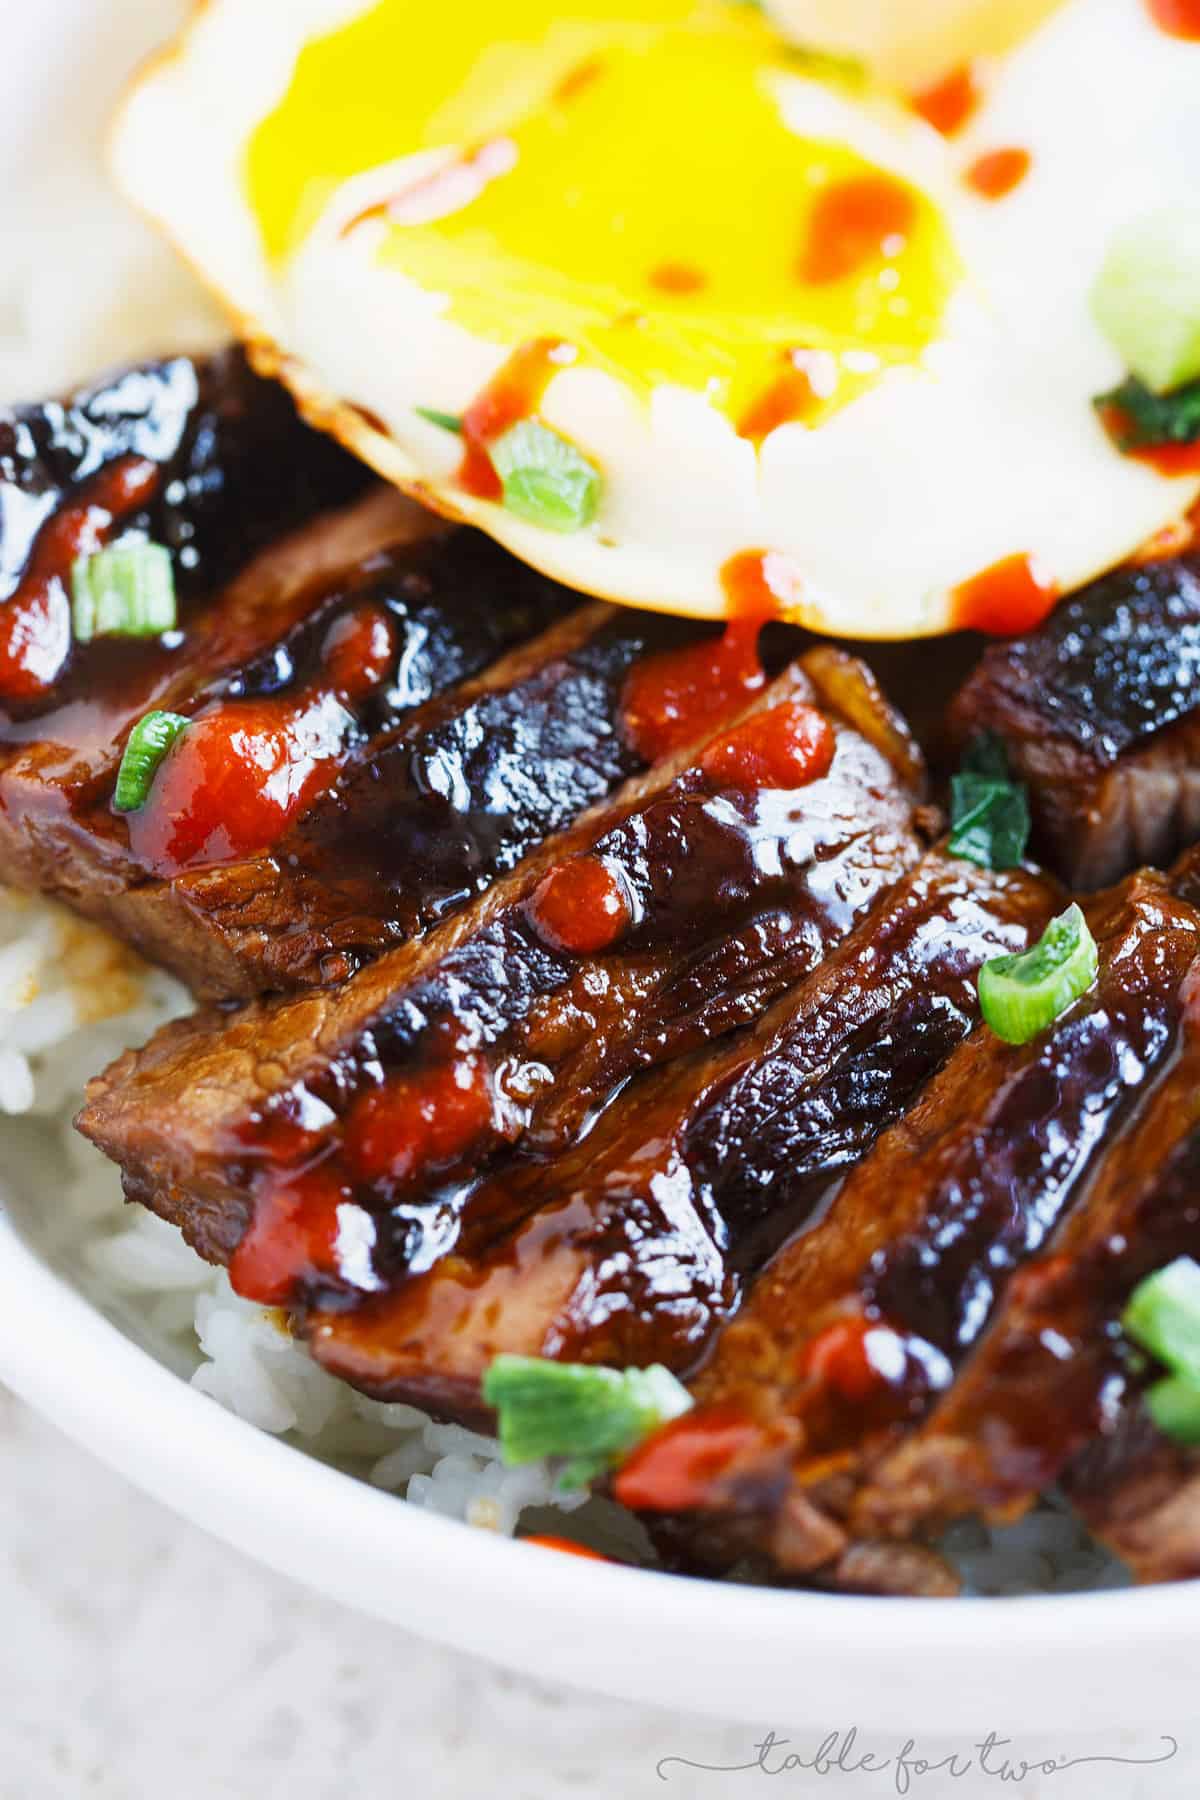 These Korean galbi bowls are so full of flavor after marinating them in a delicious sauce overnight! Build your Korean galbi bowl however you want with whatever you desire!